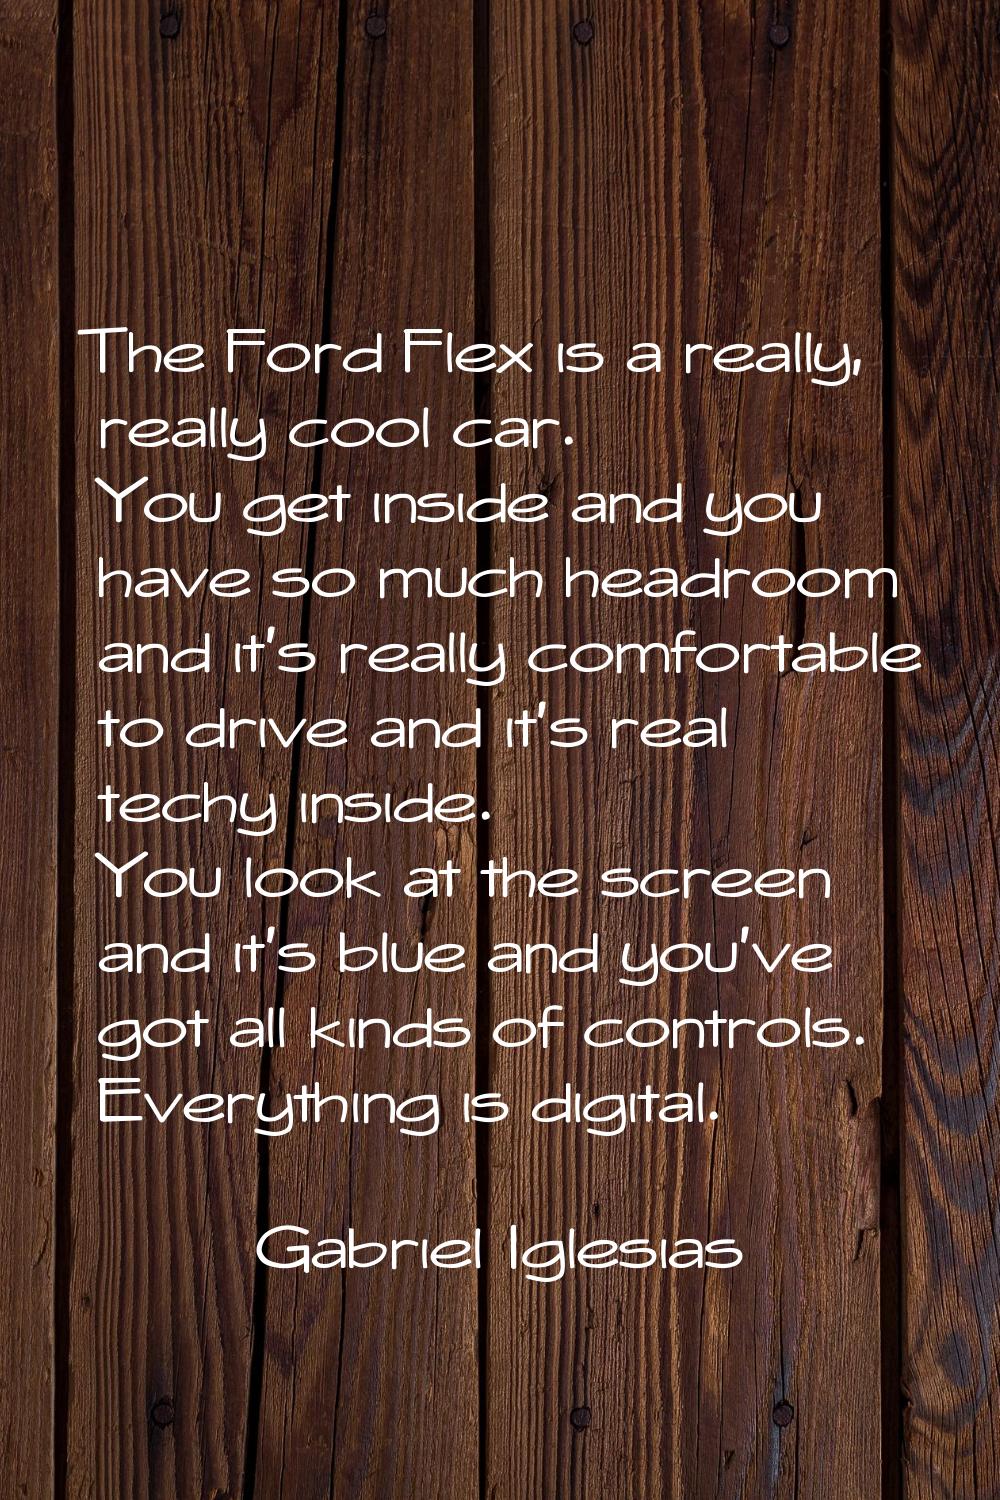 The Ford Flex is a really, really cool car. You get inside and you have so much headroom and it's r